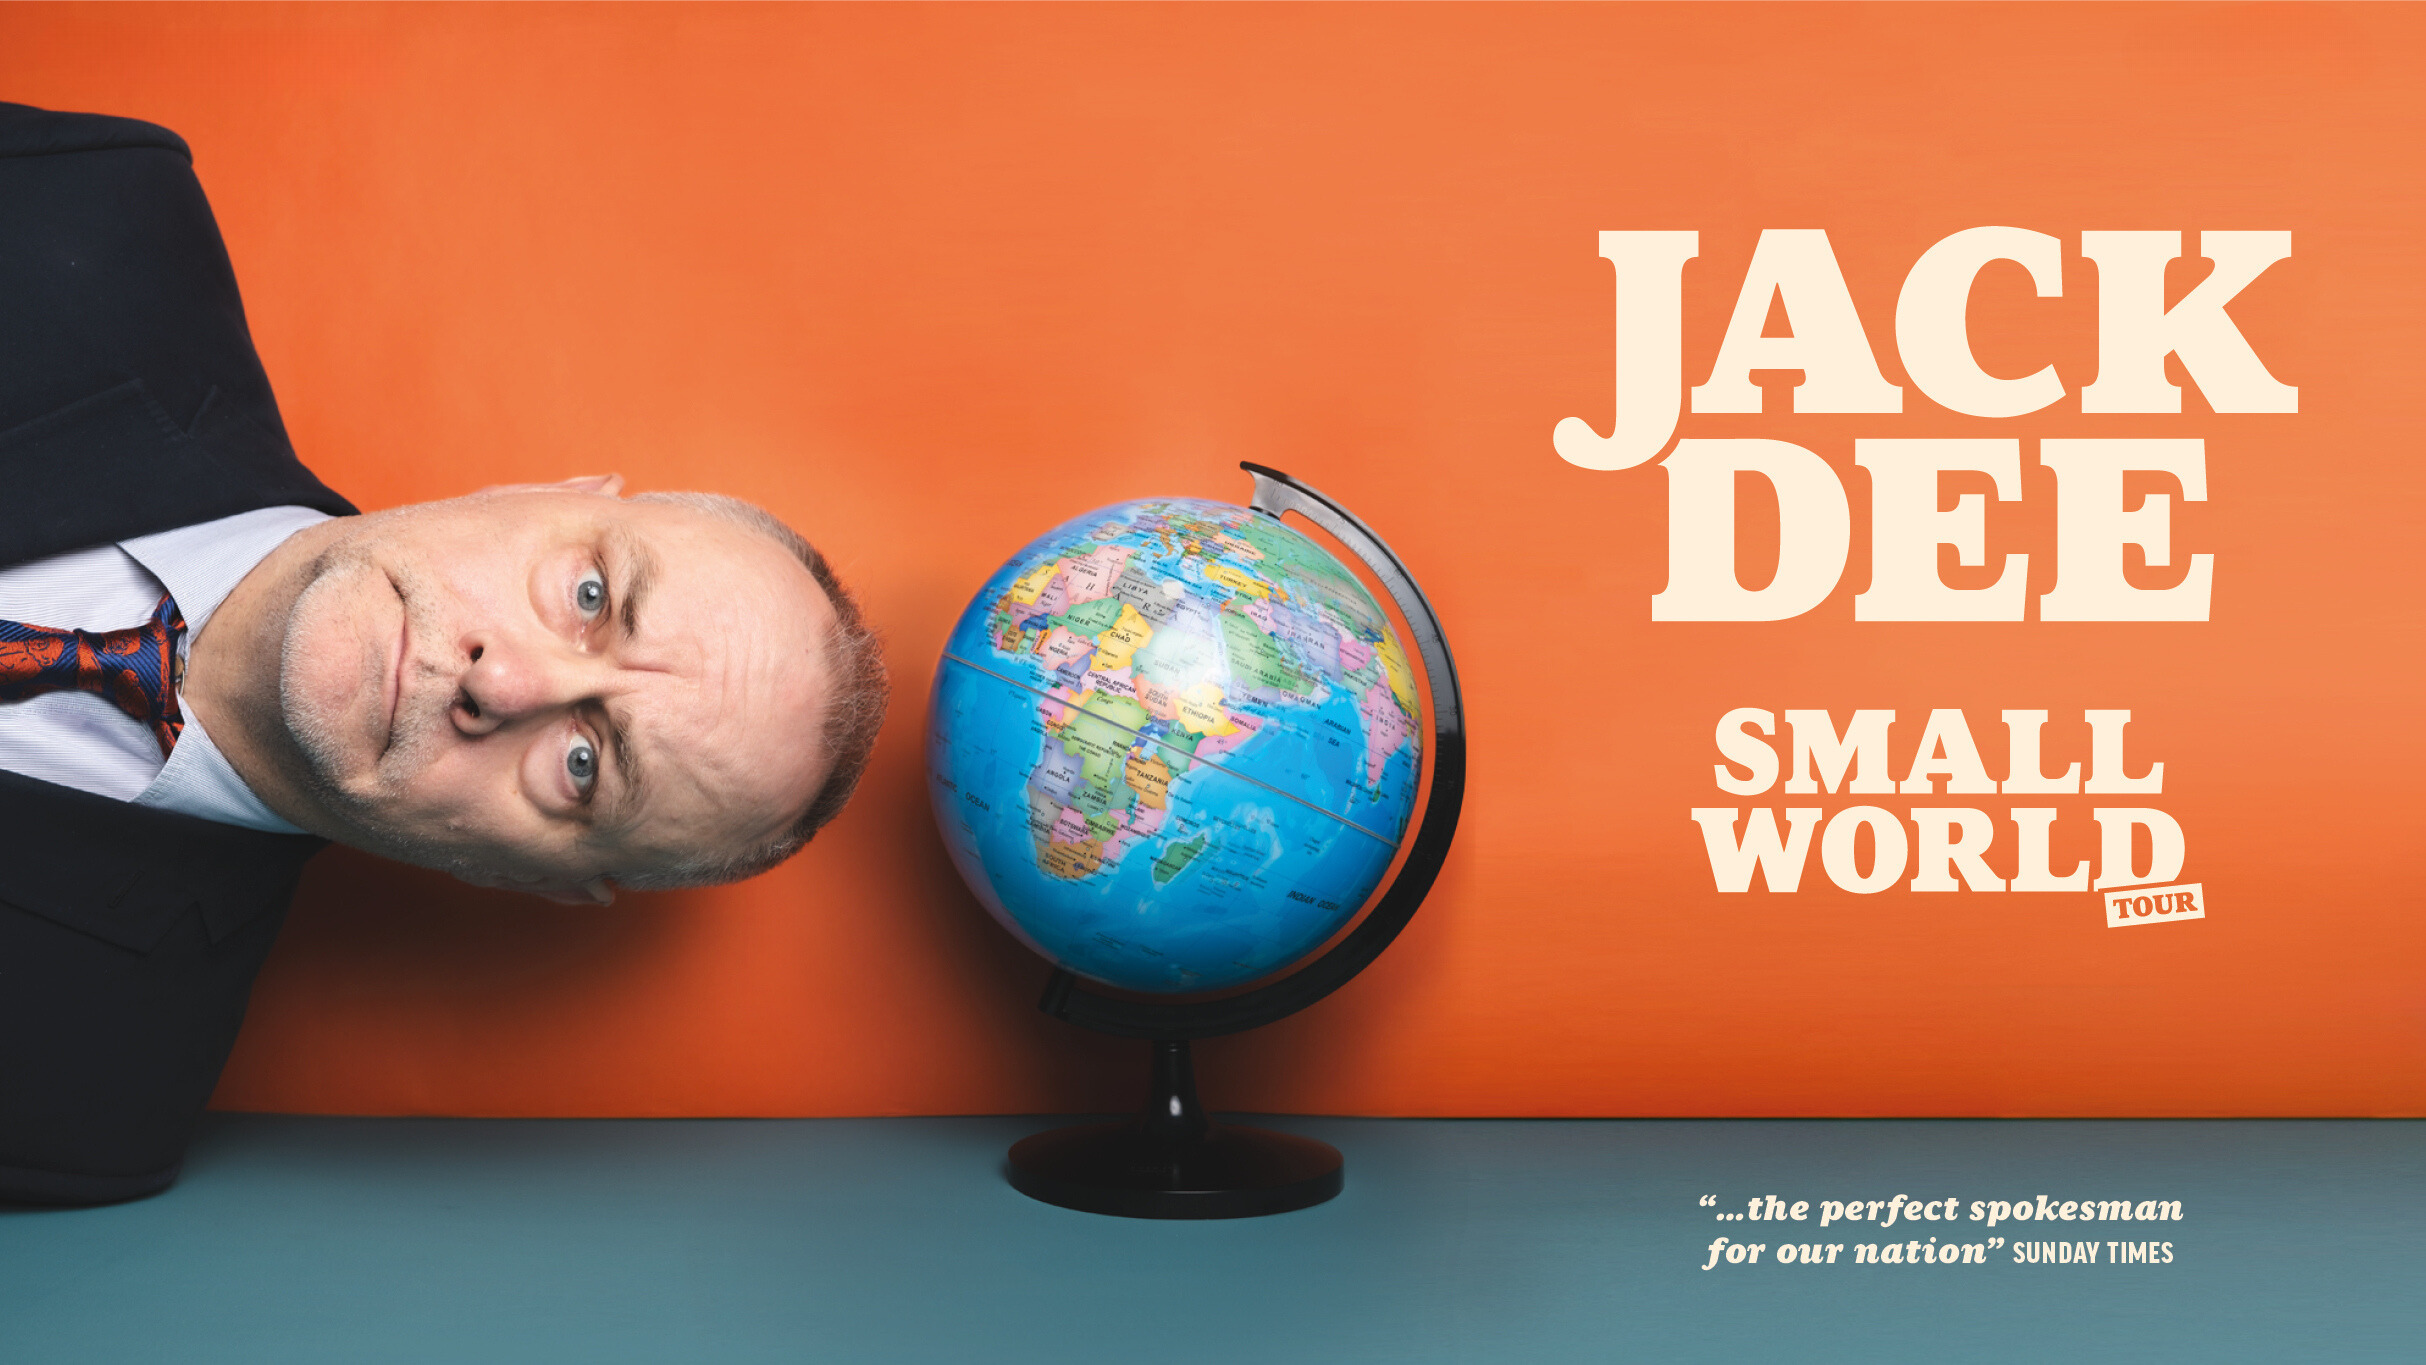 Jack Dee: Small World Event Title Pic